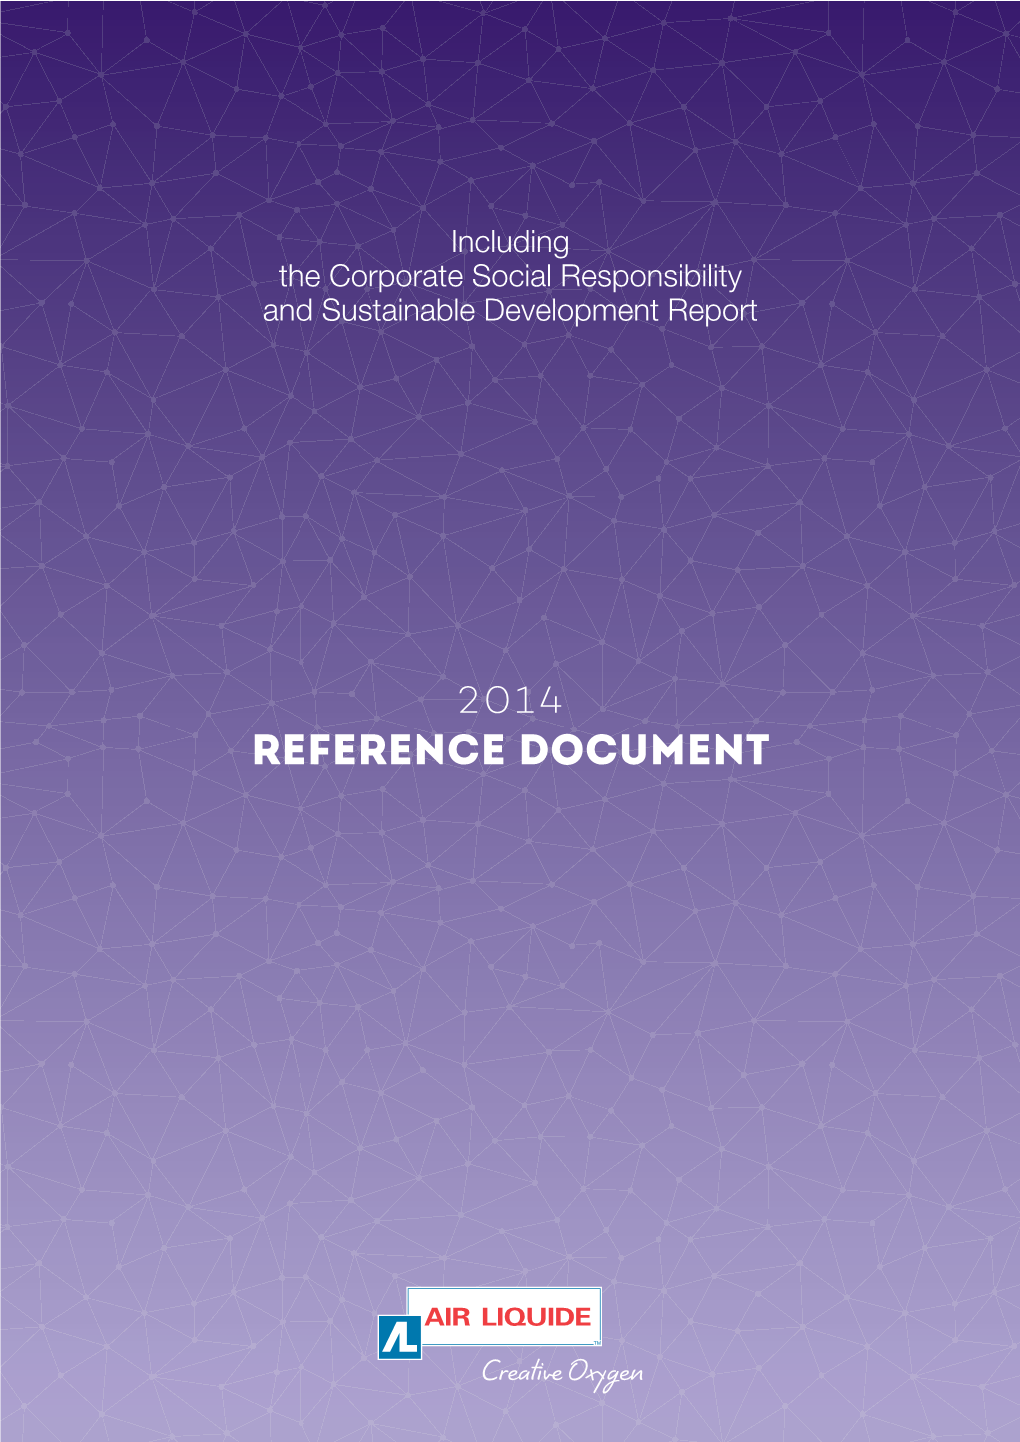 REFERENCE DOCUMENT Contents